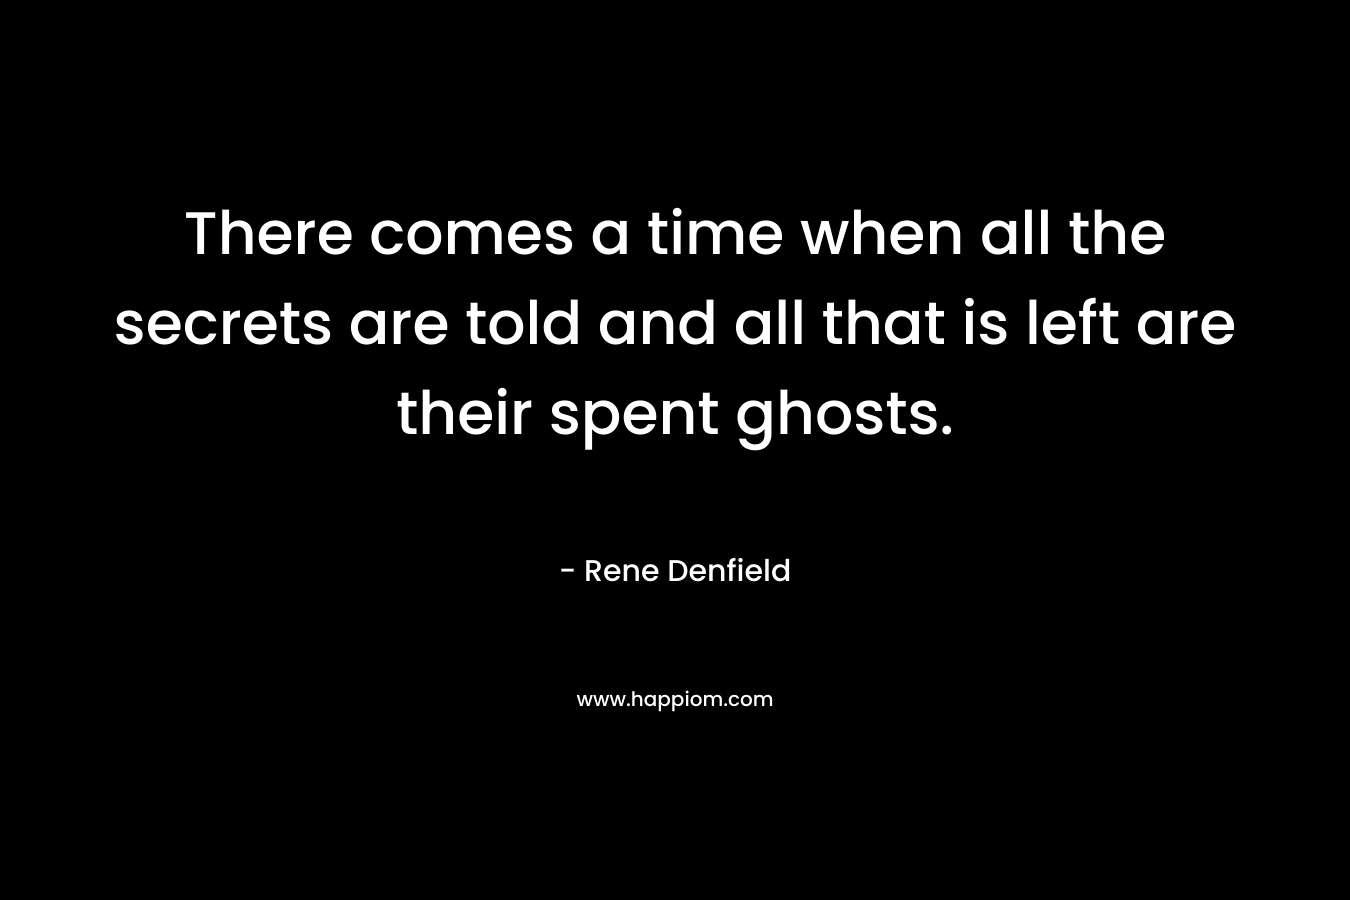 There comes a time when all the secrets are told and all that is left are their spent ghosts. – Rene Denfield